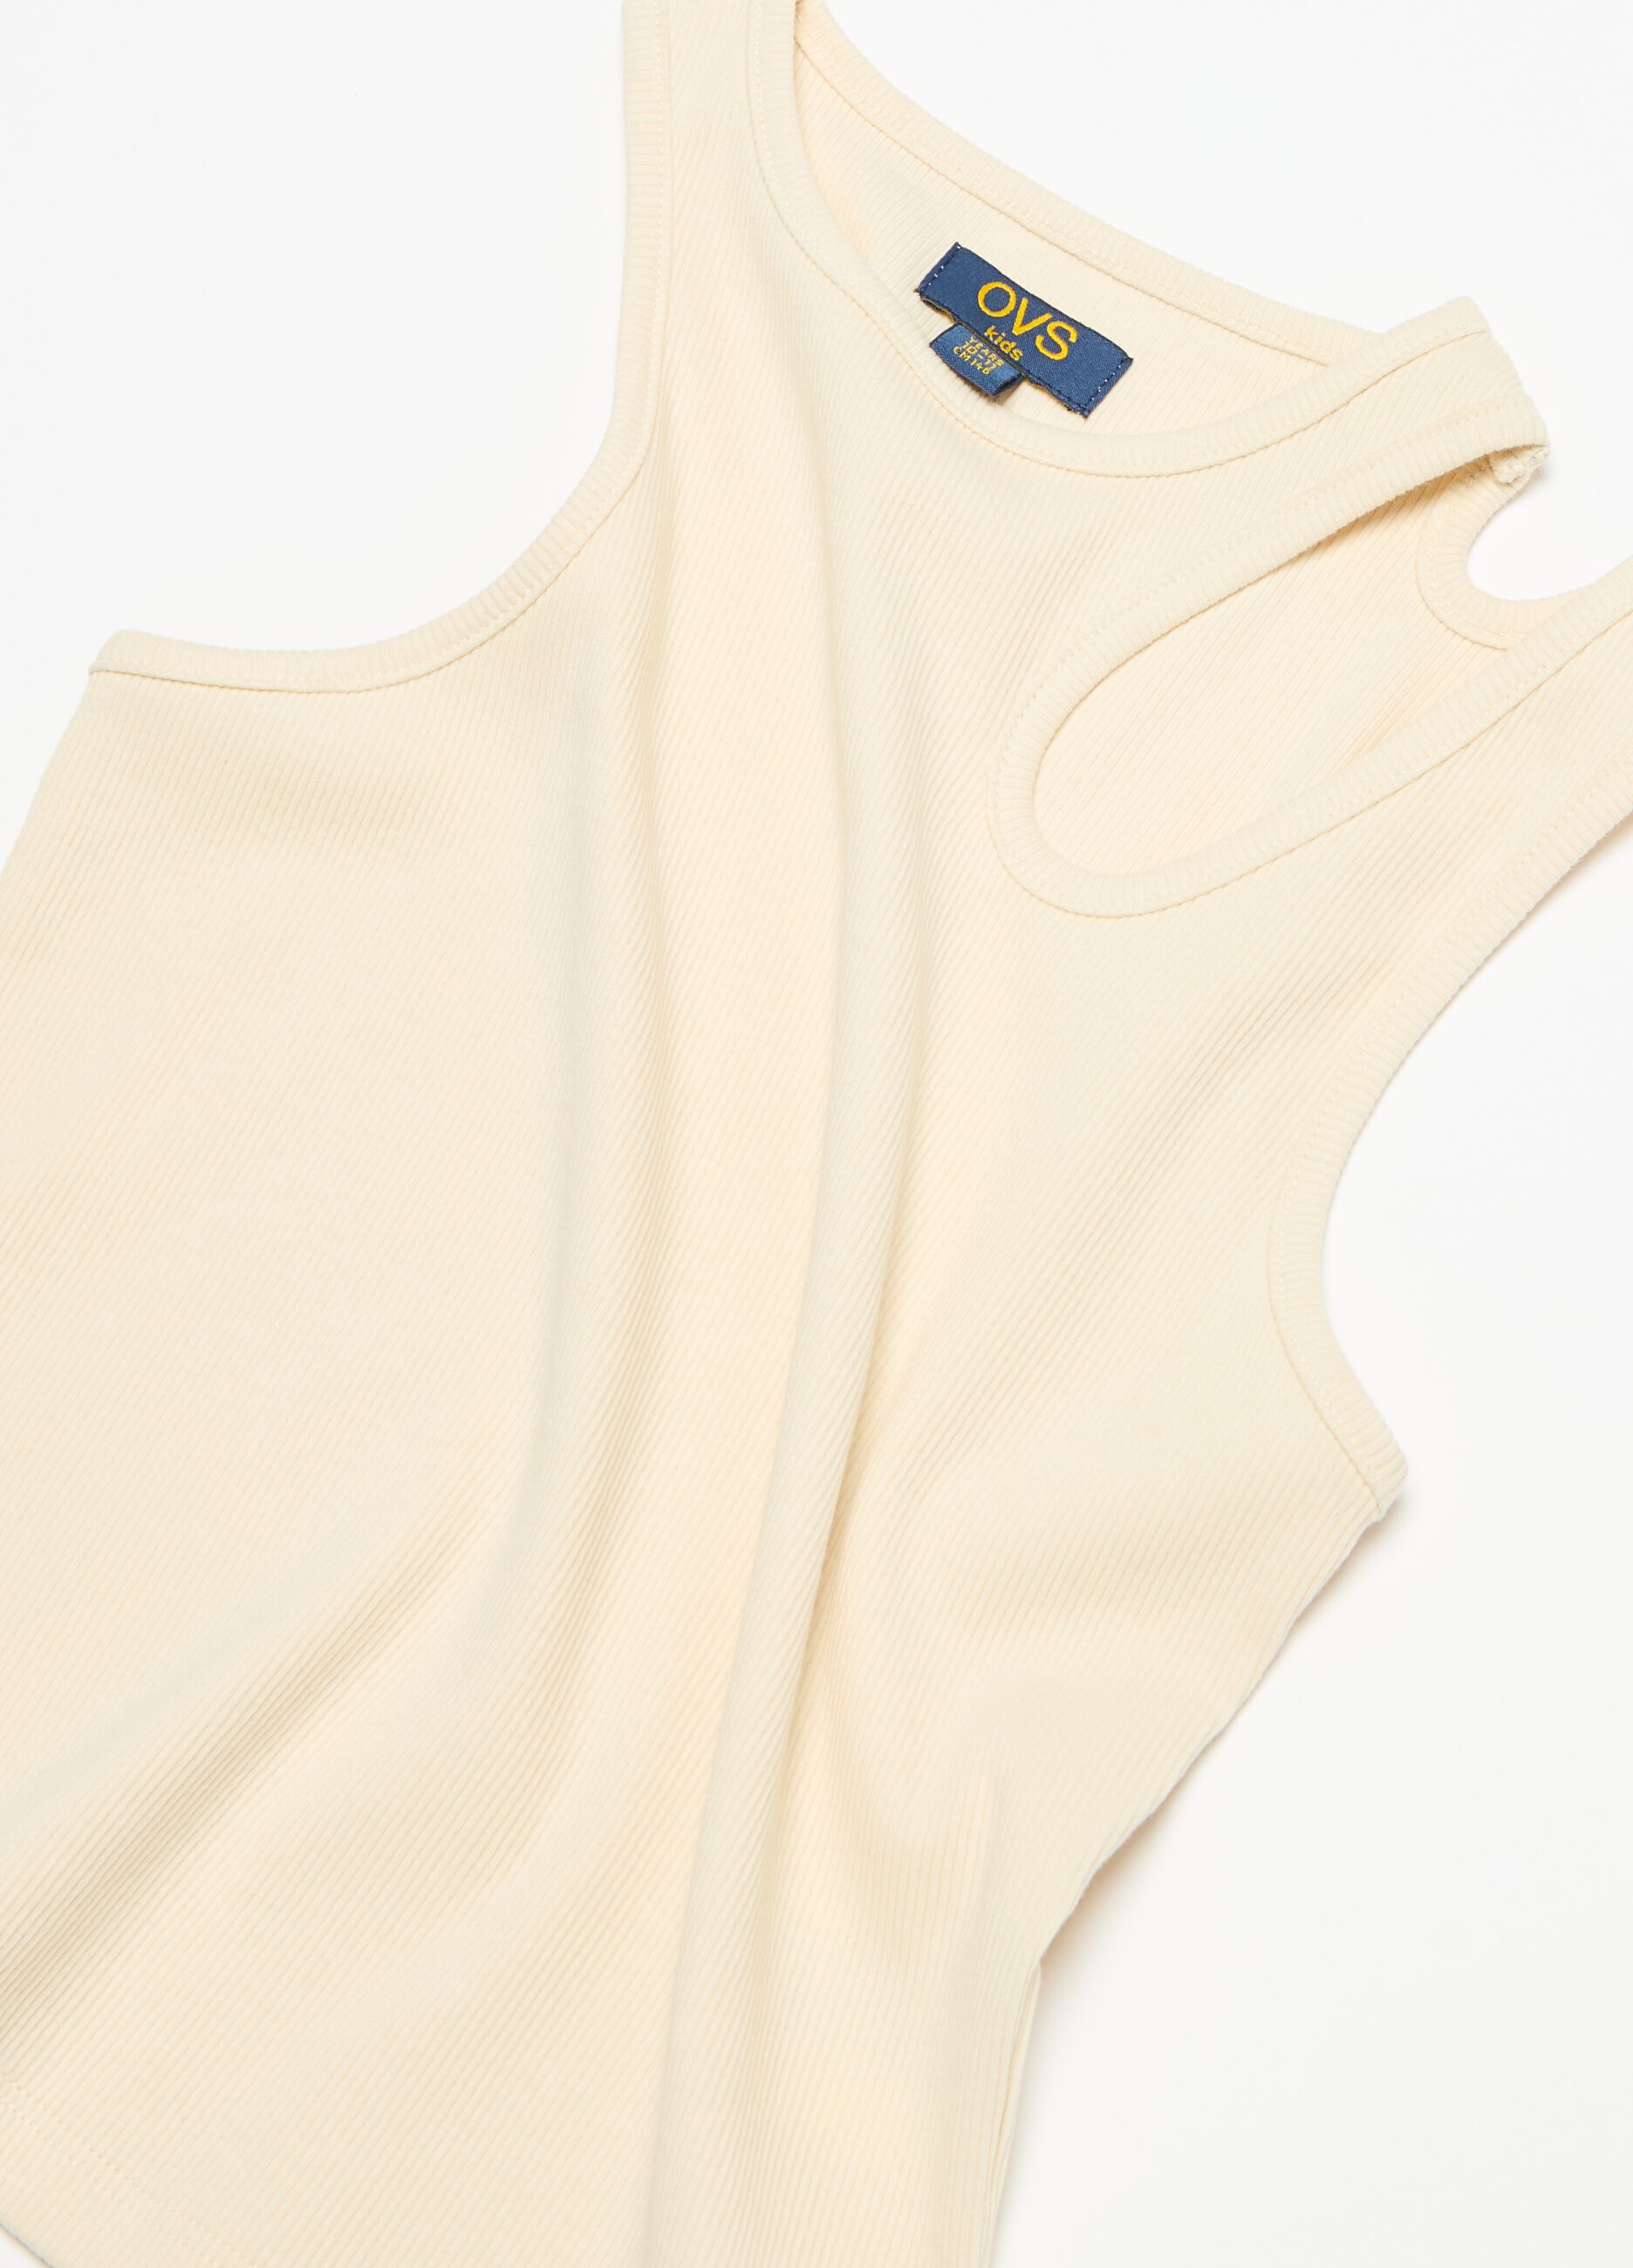 Asymmetric tank top with cut-out detail